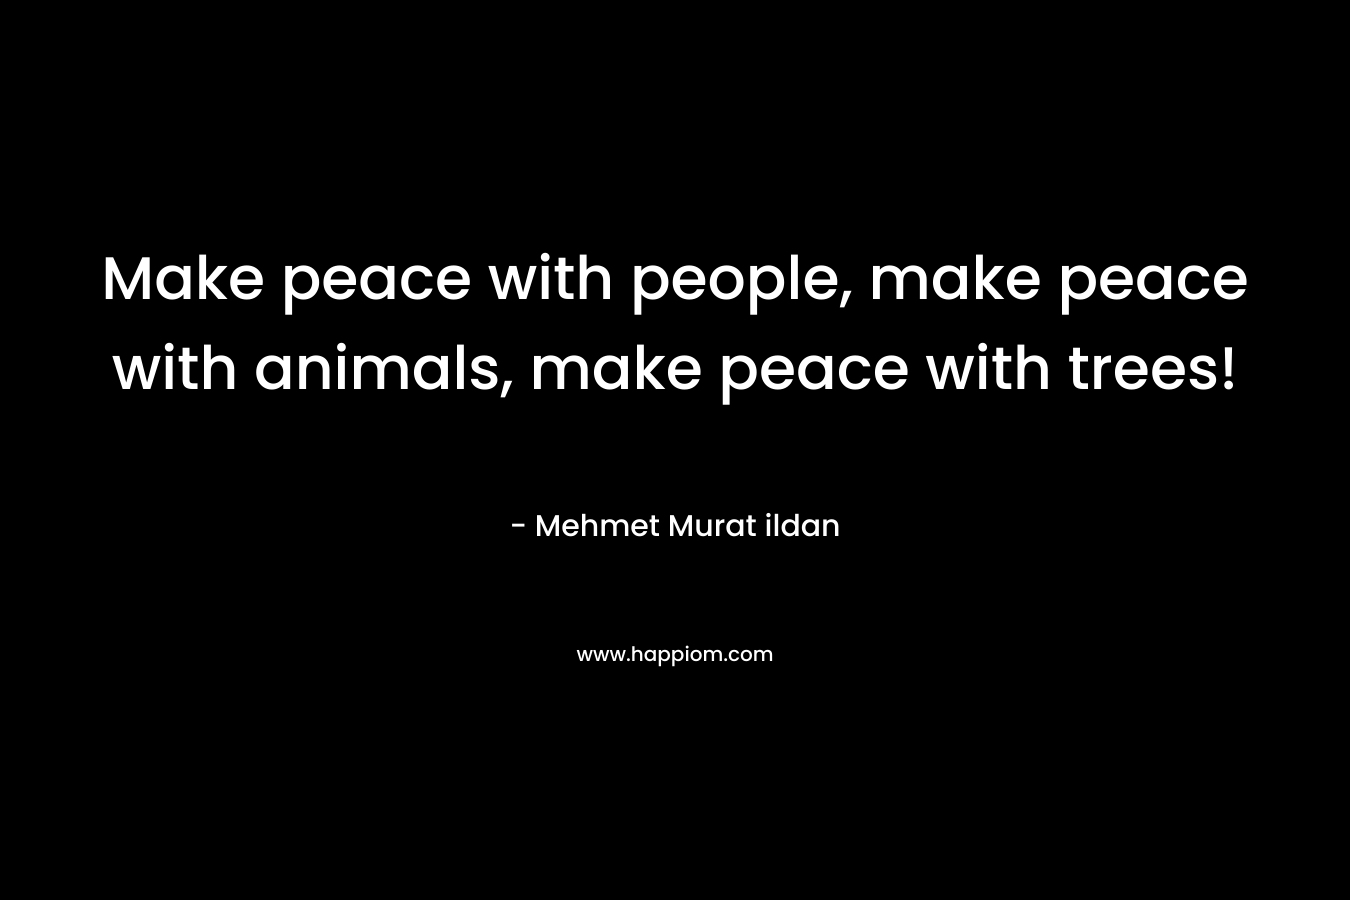 Make peace with people, make peace with animals, make peace with trees!